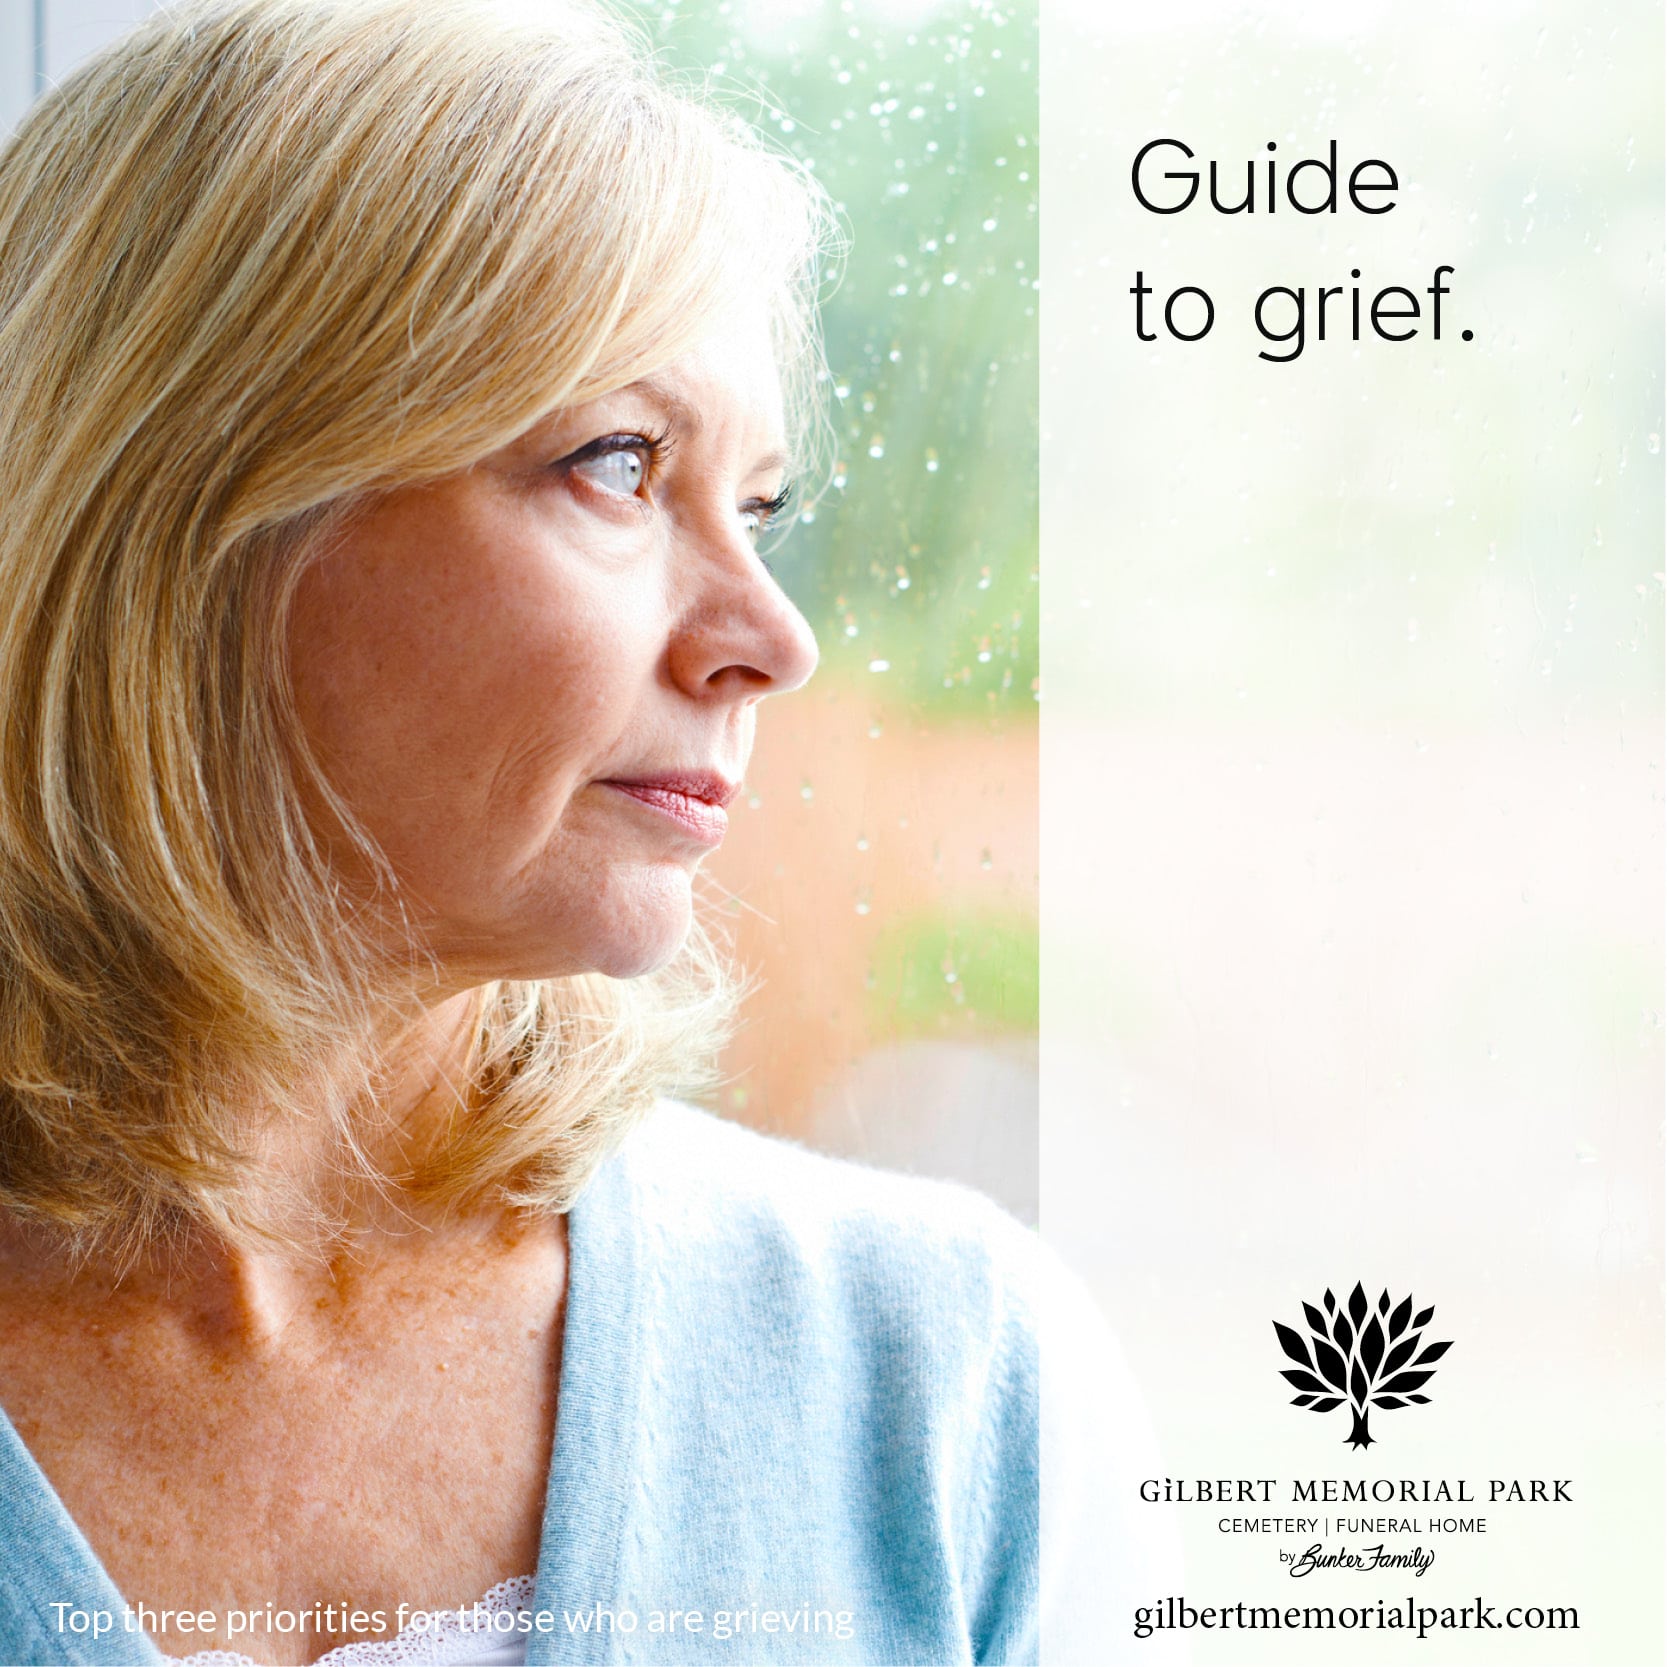 Top three priorities for those who are grieving